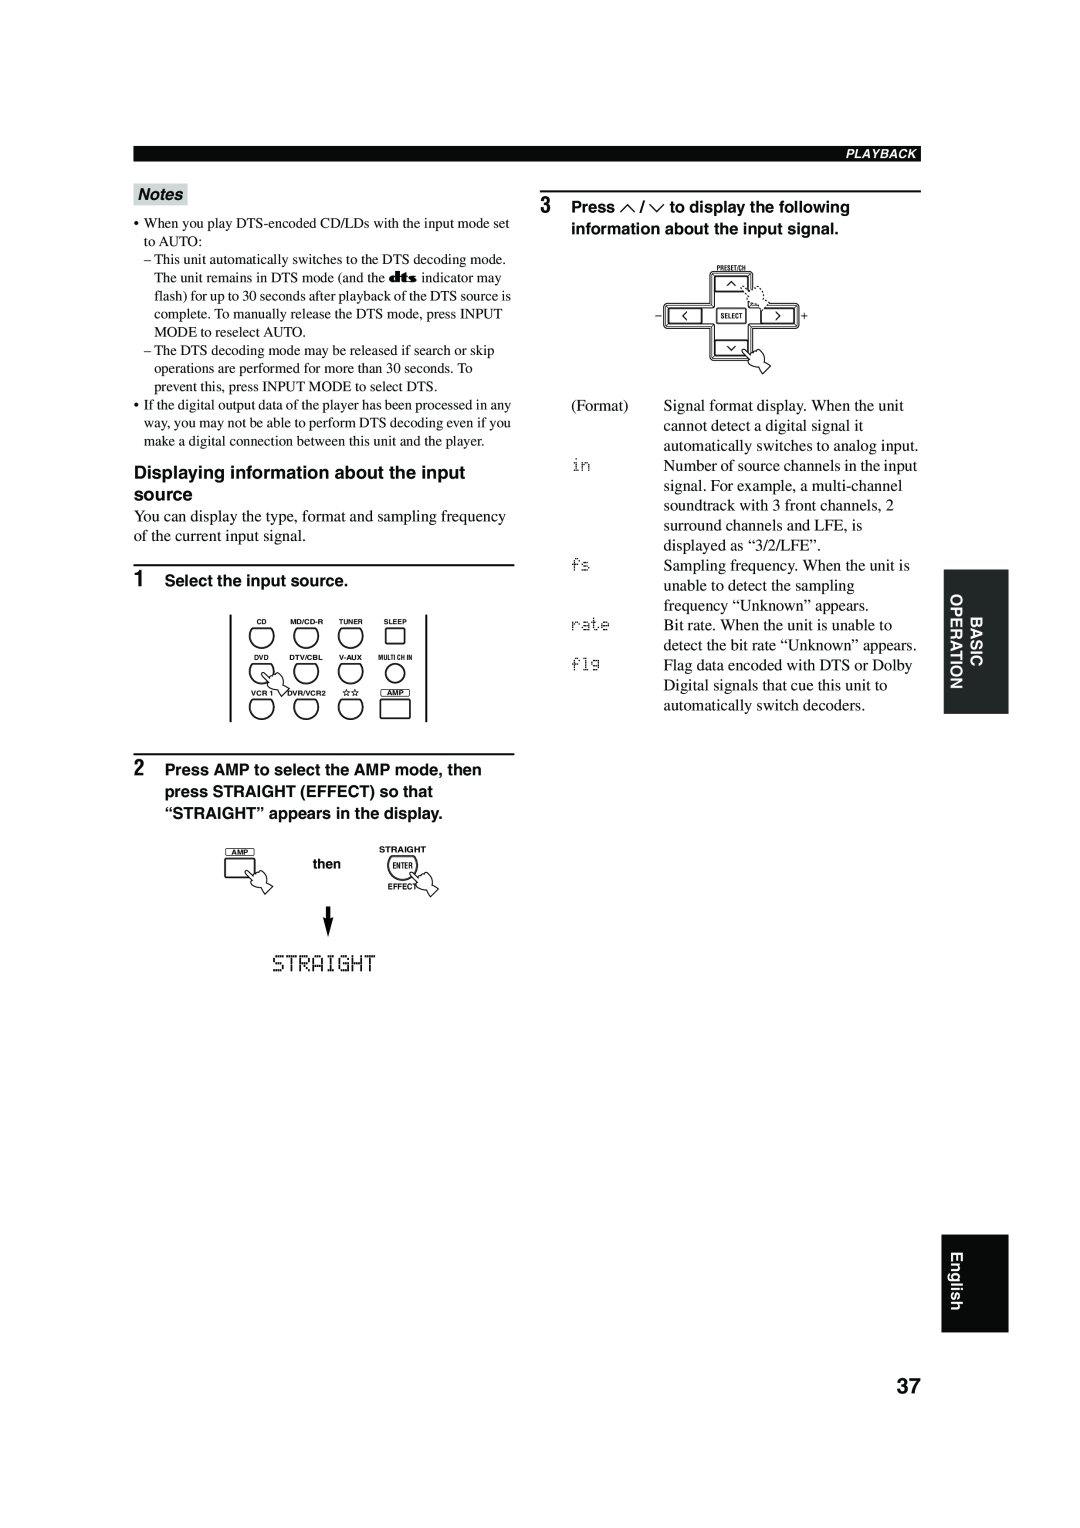 Yamaha RX-V650 owner manual Displaying information about the input, source, Press u / d to display the following, Straight 